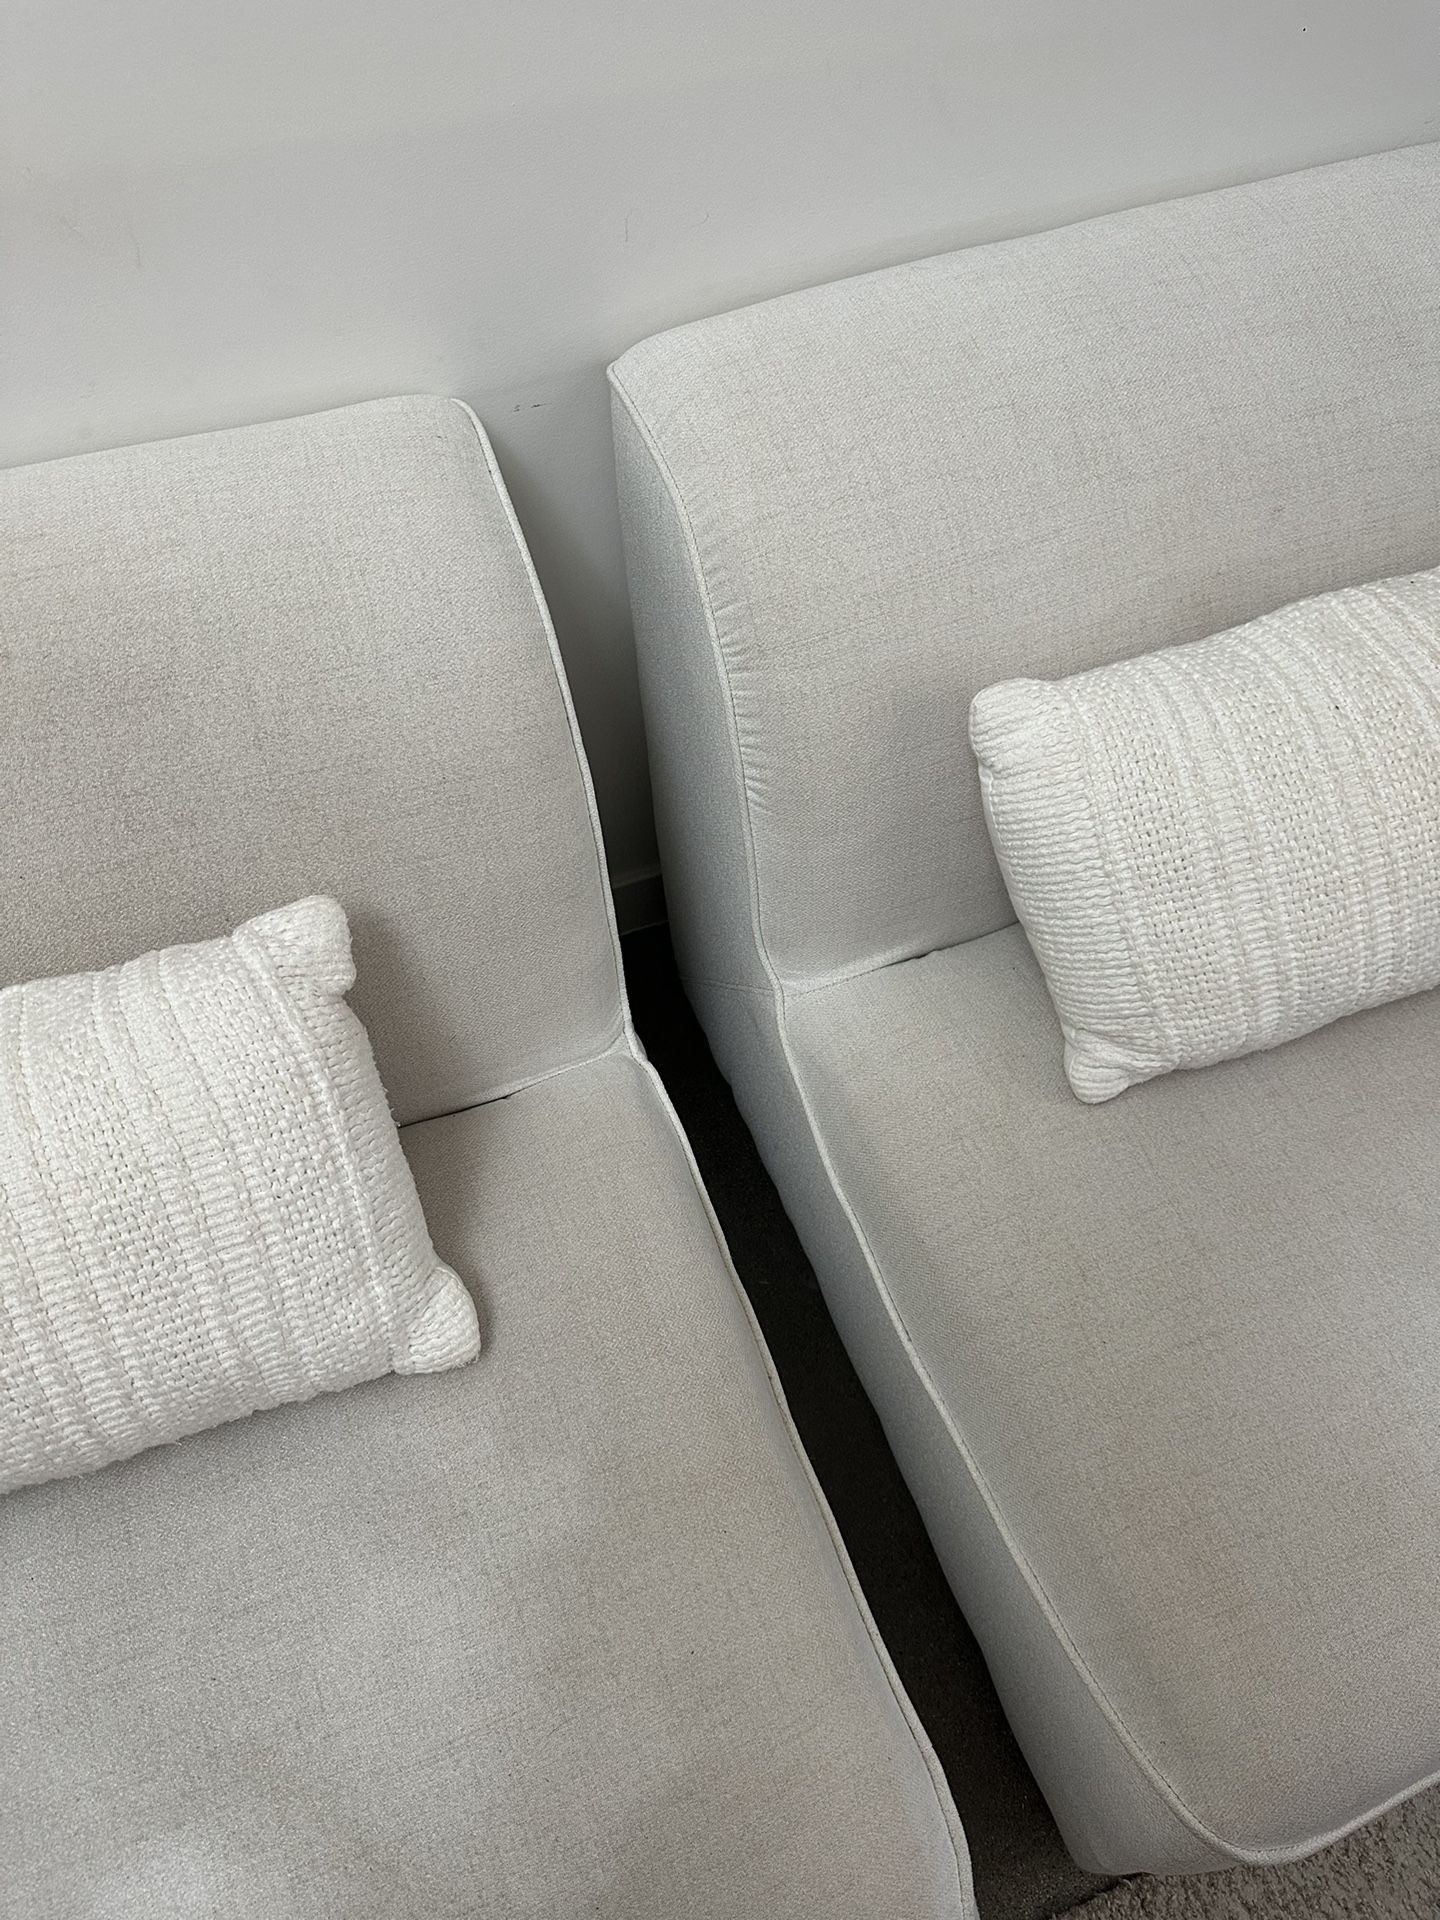 White Couch & Pillows 